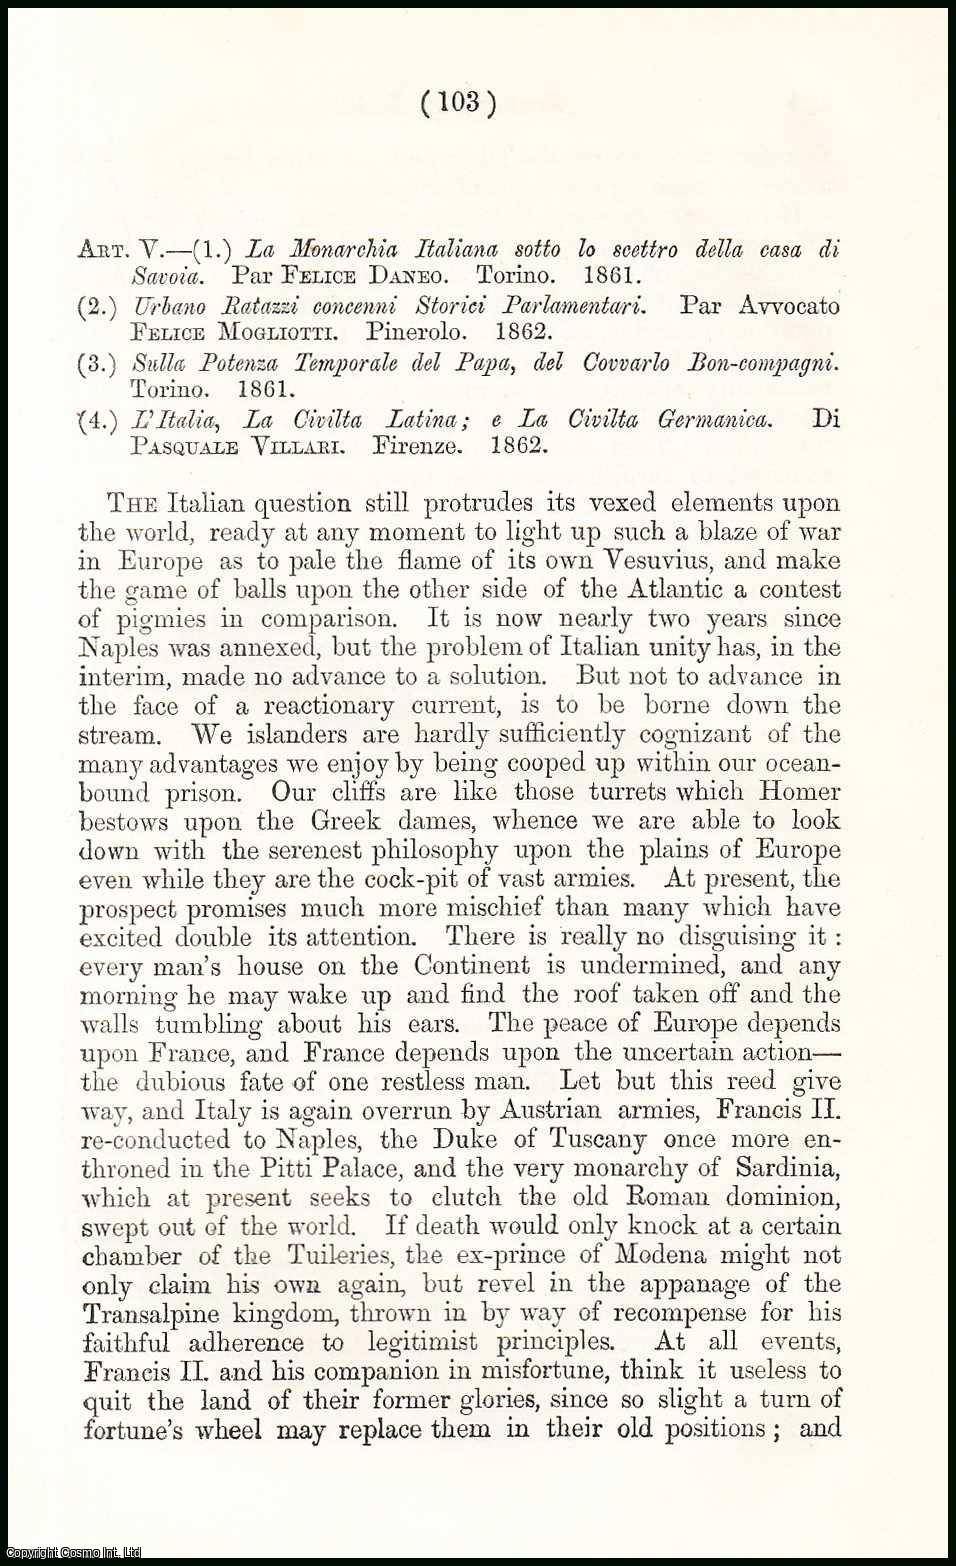 Author Unknown - France and Italy. A rare original article from the British Quarterly Review, 1862.